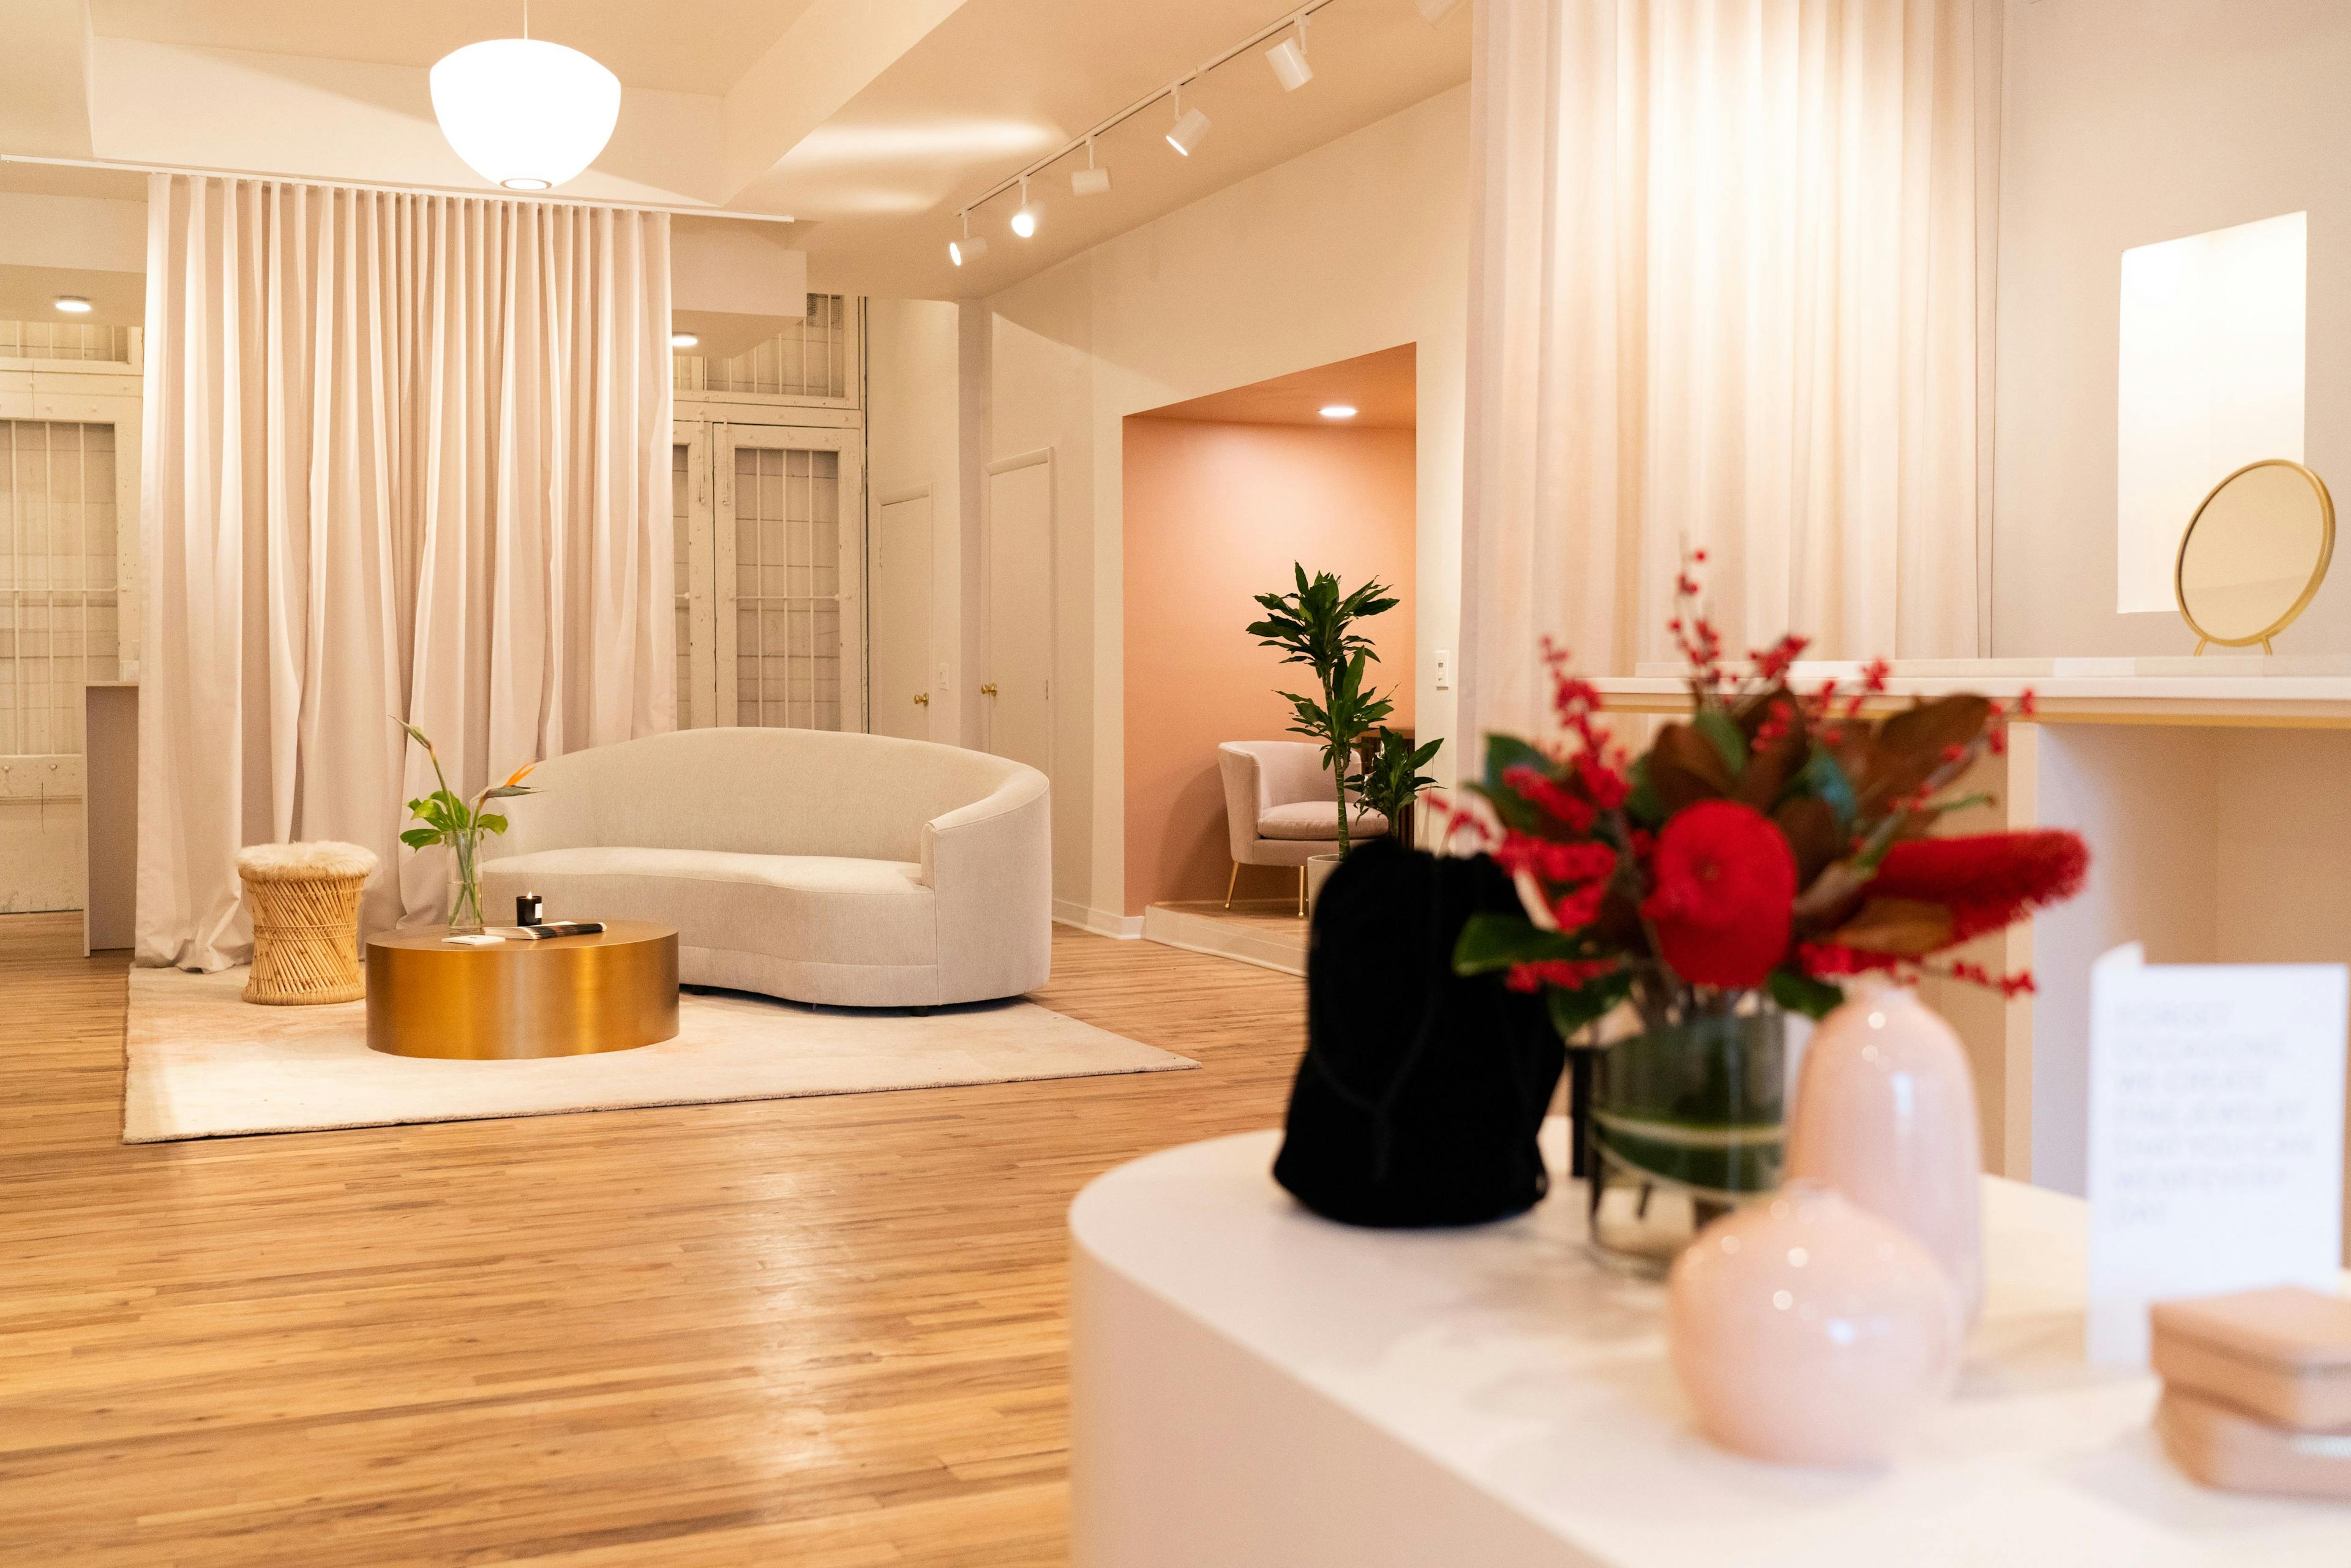 Luxurious Mejuri NYC Flagship store interior design with diaphanous drapes, curved furnishings, and neutral palette.